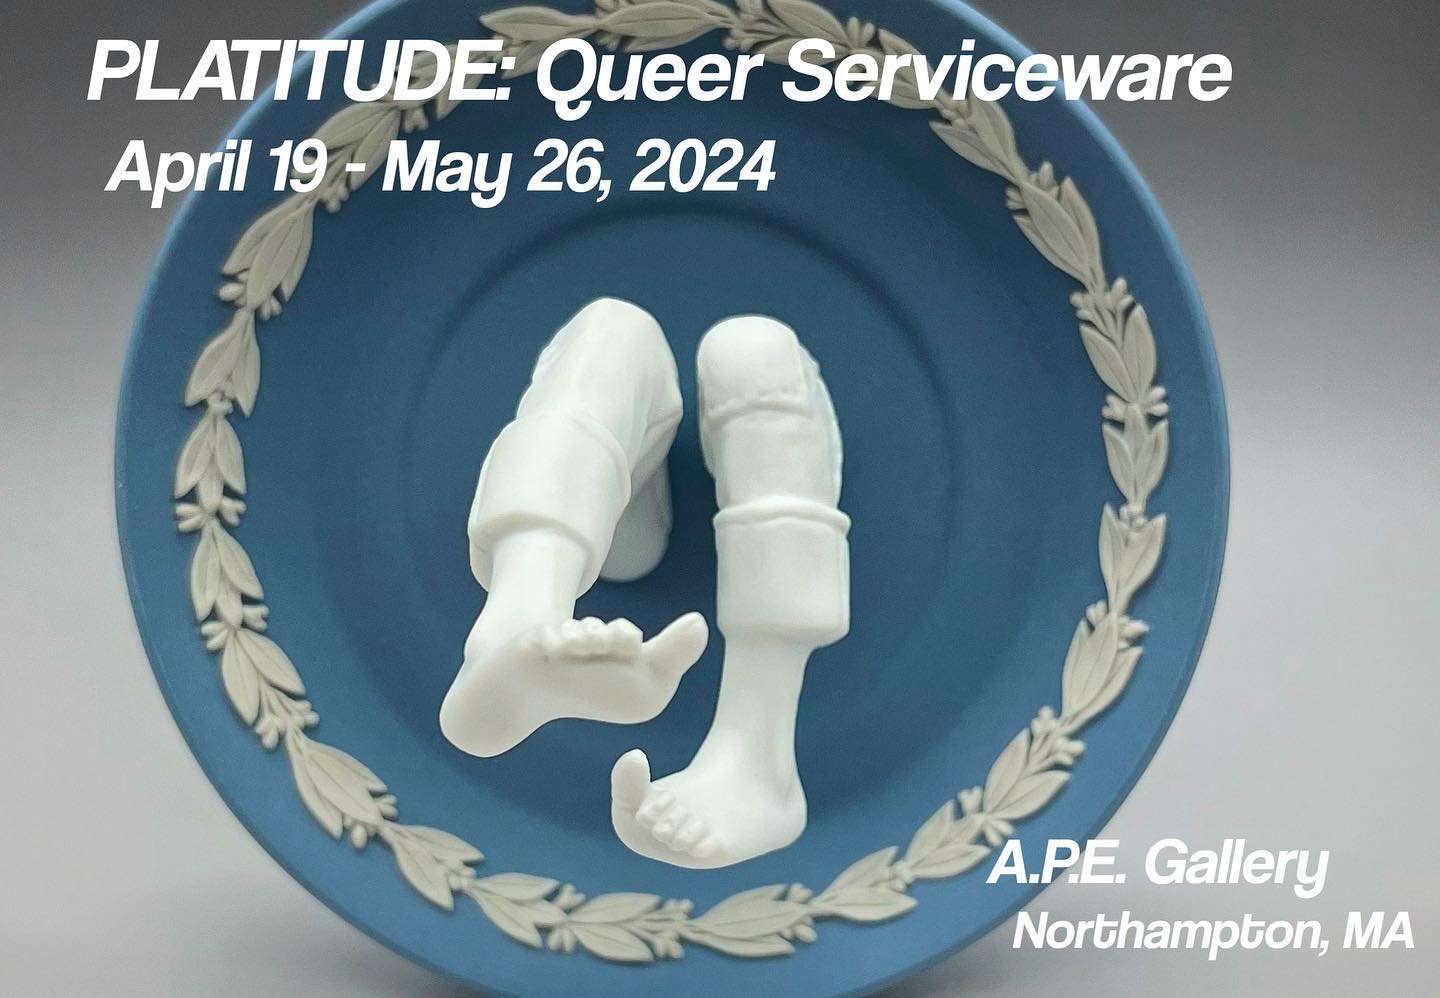 Excited to announce the opening of PLATITUDE: Queer Serviceware @apearts in Northampton this Friday. I&rsquo;ve curated 10 artists that use ceramics as a way to talk about queer culture. More to come!

Image credit: Footsie, Jeremy Brooks @decalcoman